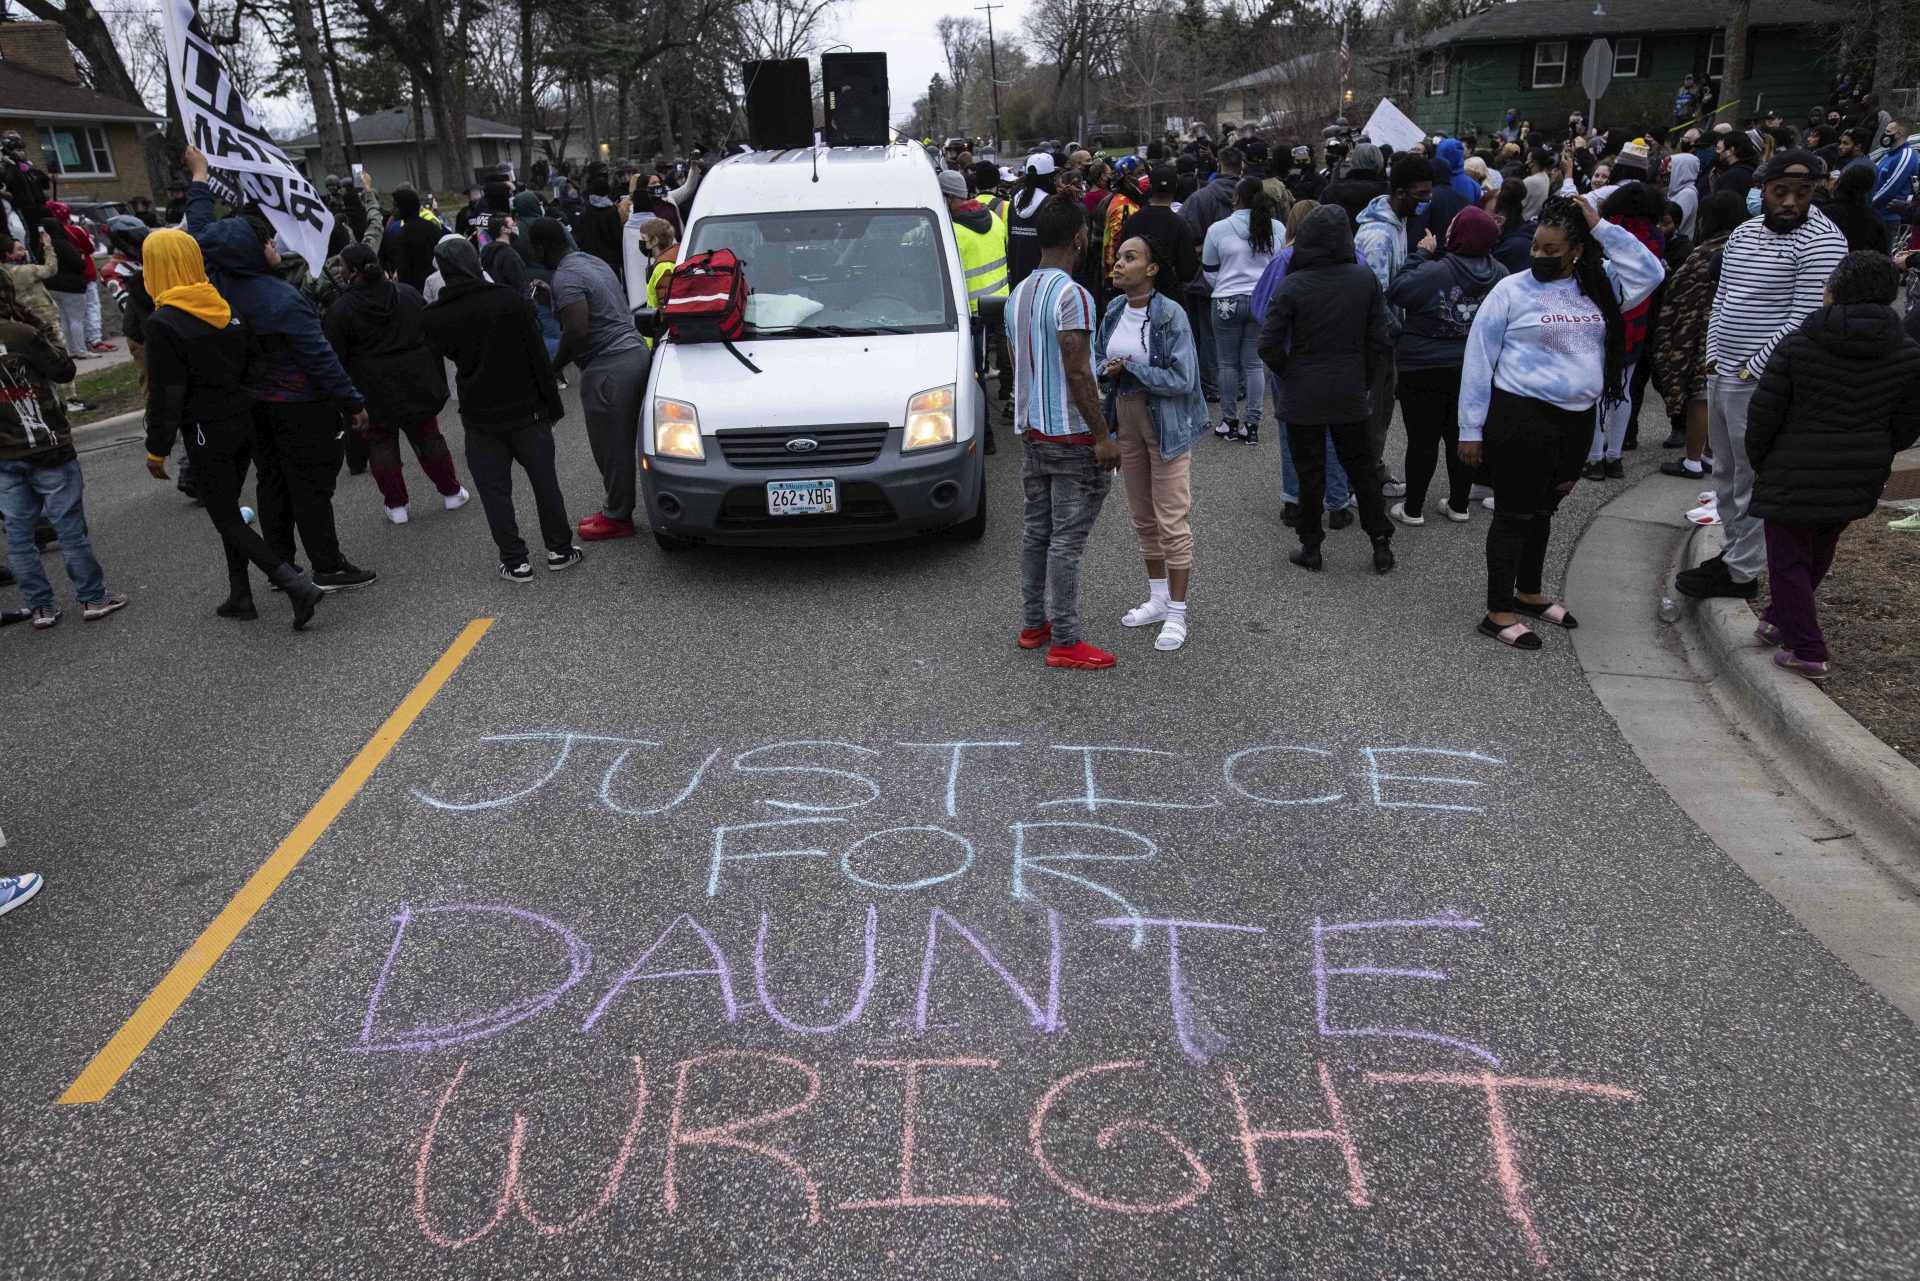 People gather in protest, Sunday, April 11, 2021, in Brooklyn Center, Minn. The family of Daunte Wright, 20, told a crowd that he was shot by police Sunday before getting back into his car and driving away, then crashing the vehicle several blocks away. The family said Wright was later pronounced dead.